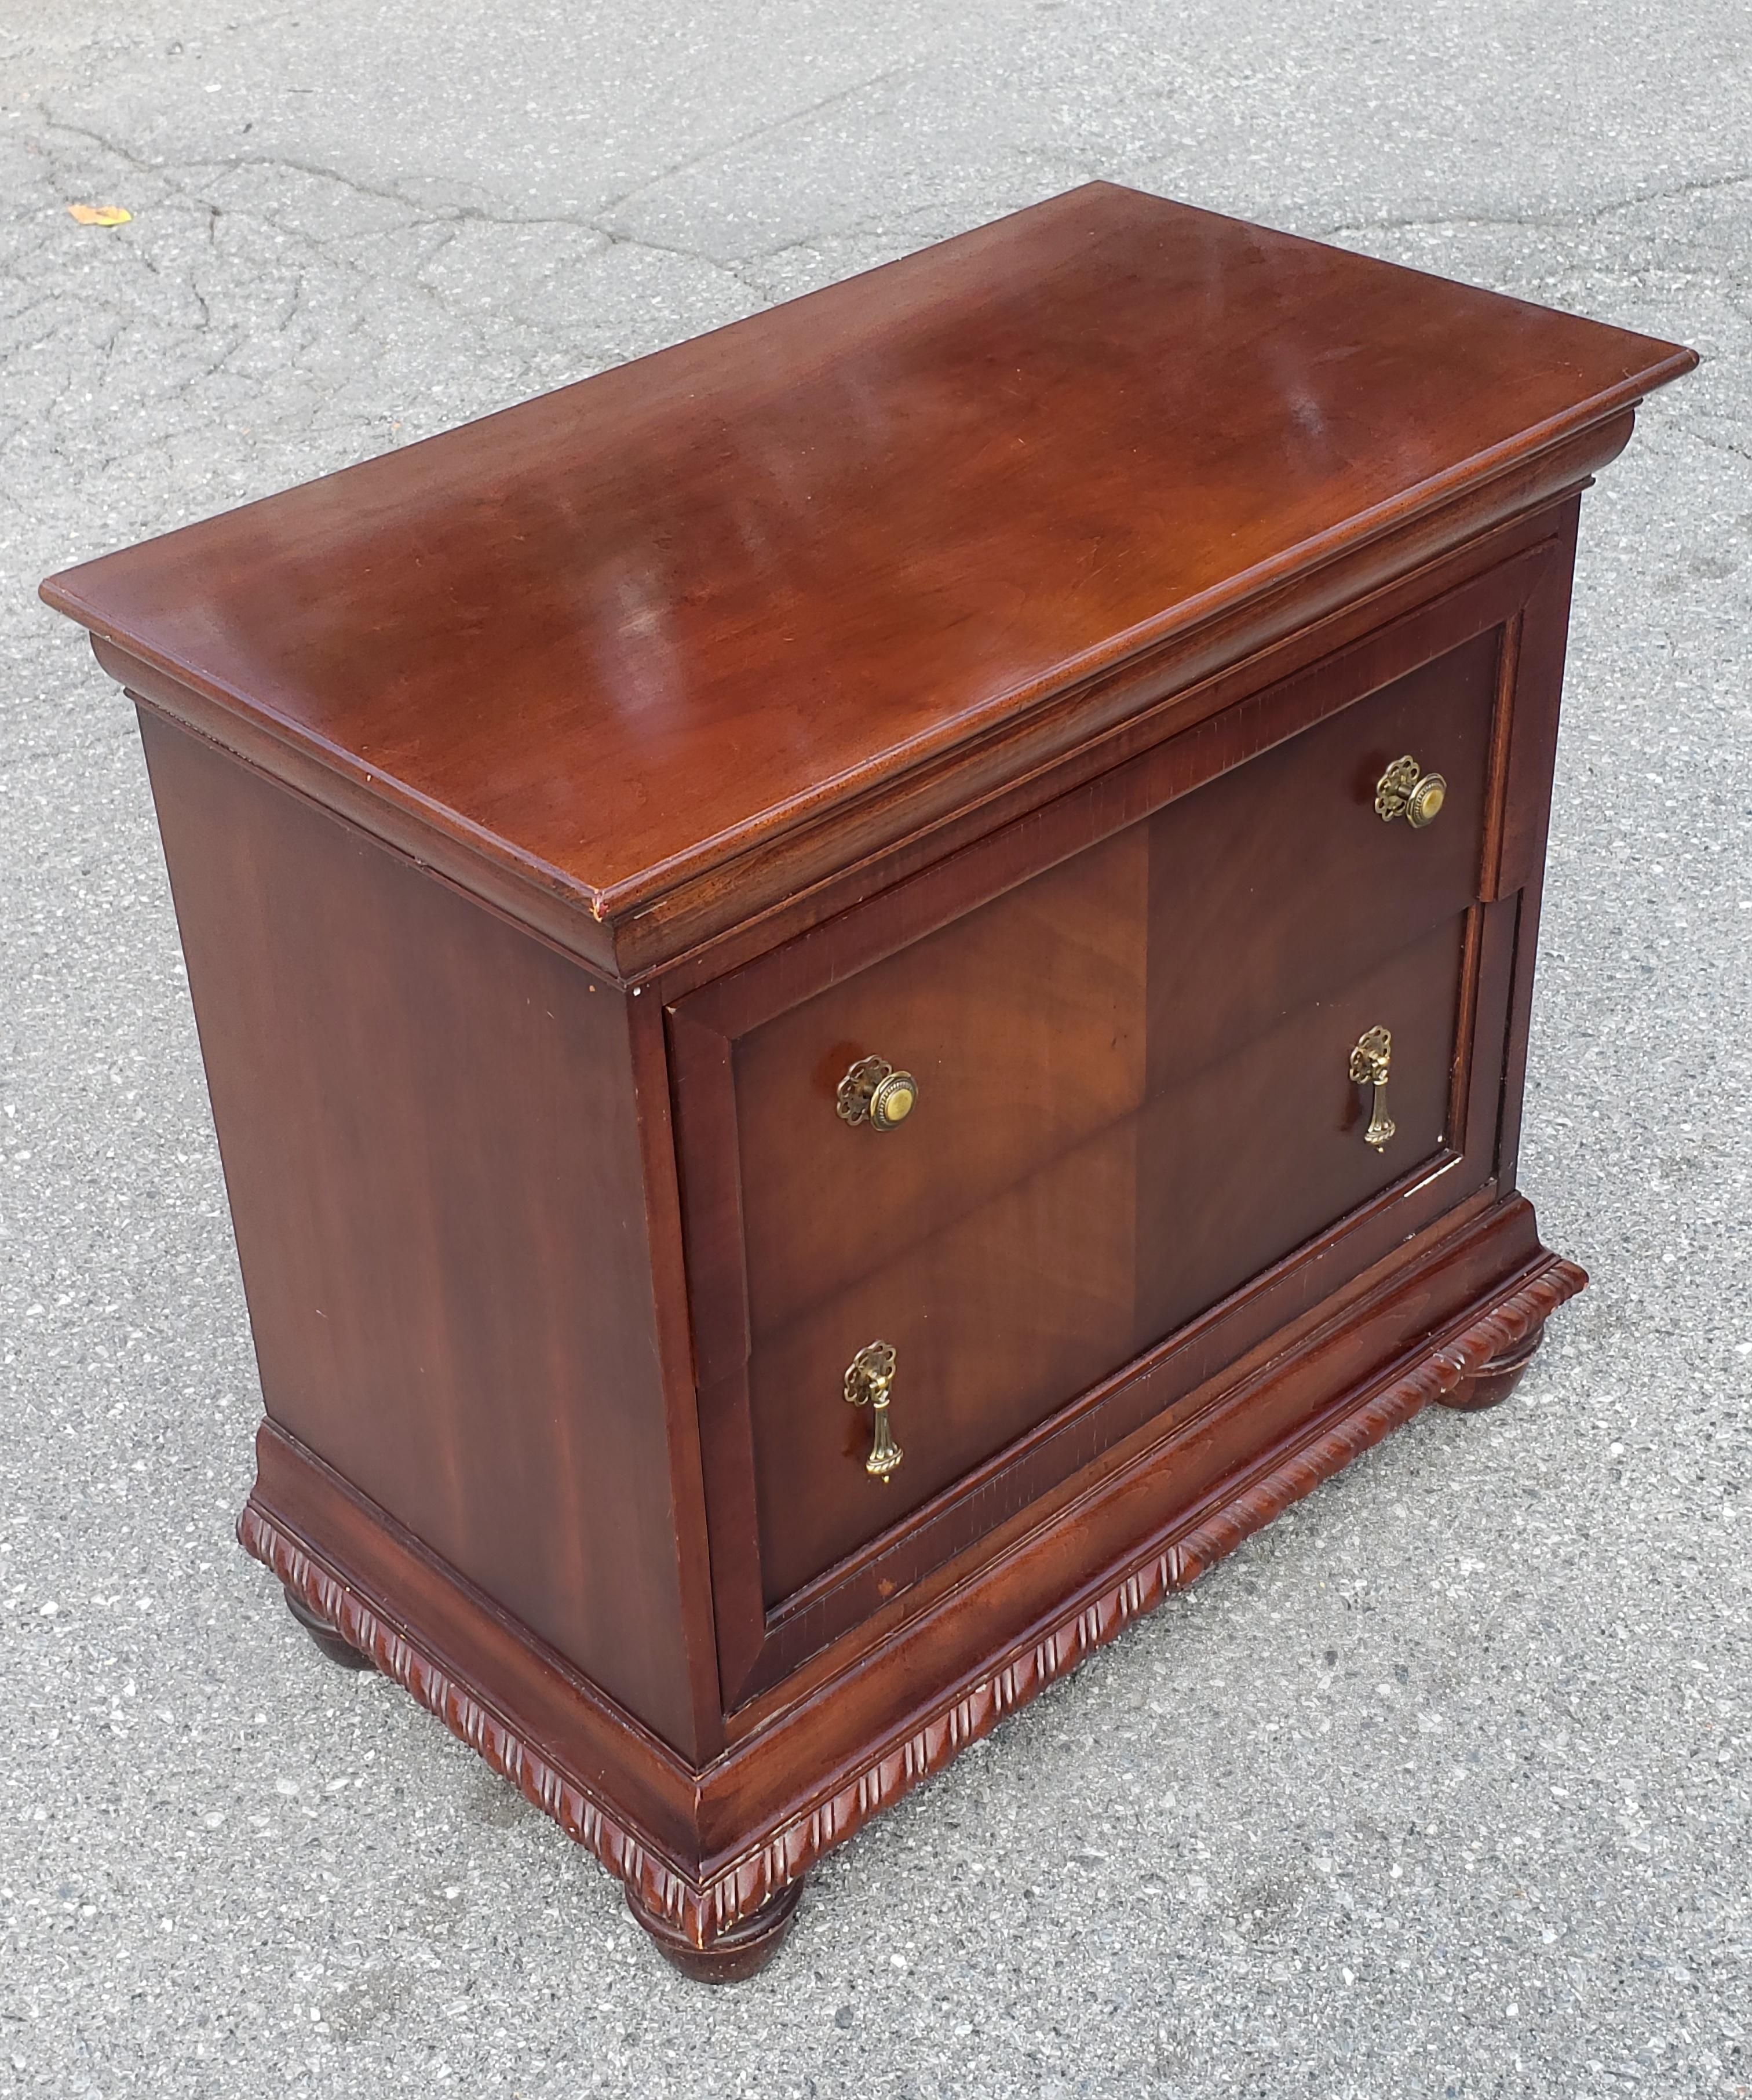 20th Century National Mt Airy Bookmatched Mahogany Bedside Chest of Drawers / Nighstand For Sale